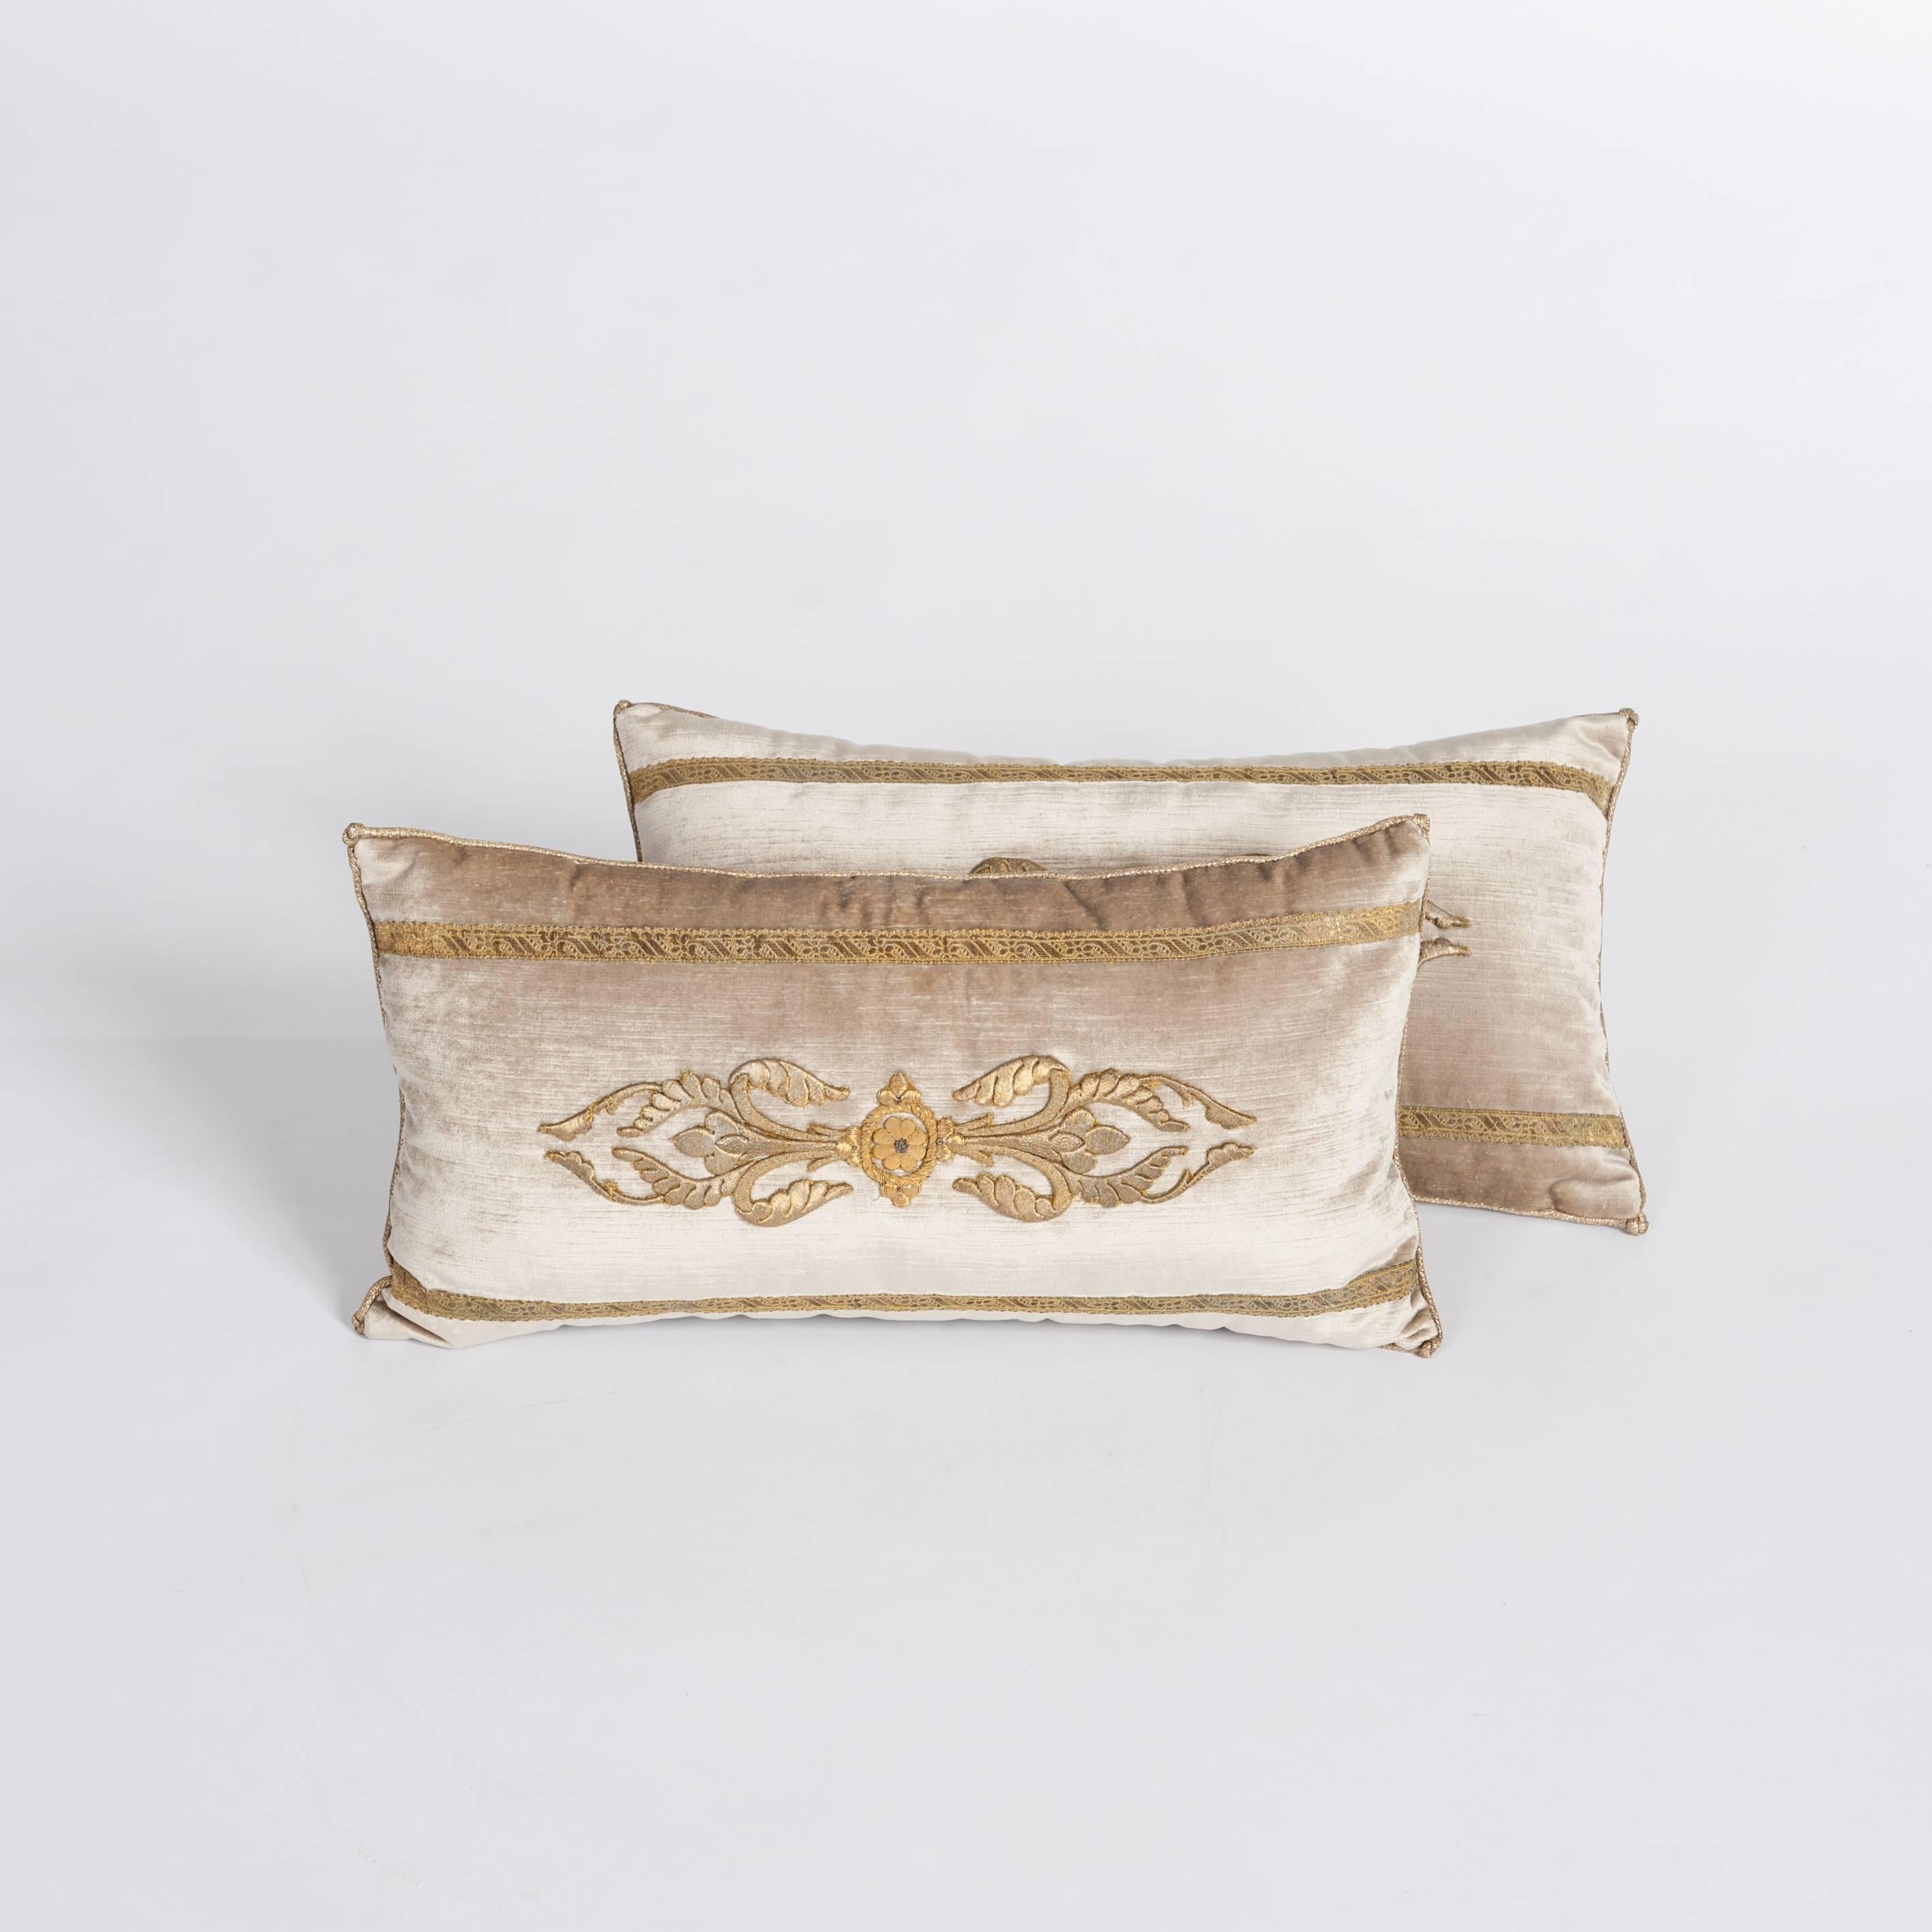 A pair of down-filled pillows fabricated with a 18th century raised gold metallic
embroidery bordered with same period gold metallic gallon on pale French
champagne velvet.
Hand trimmed with vintage gold metallic cording from Europe.

